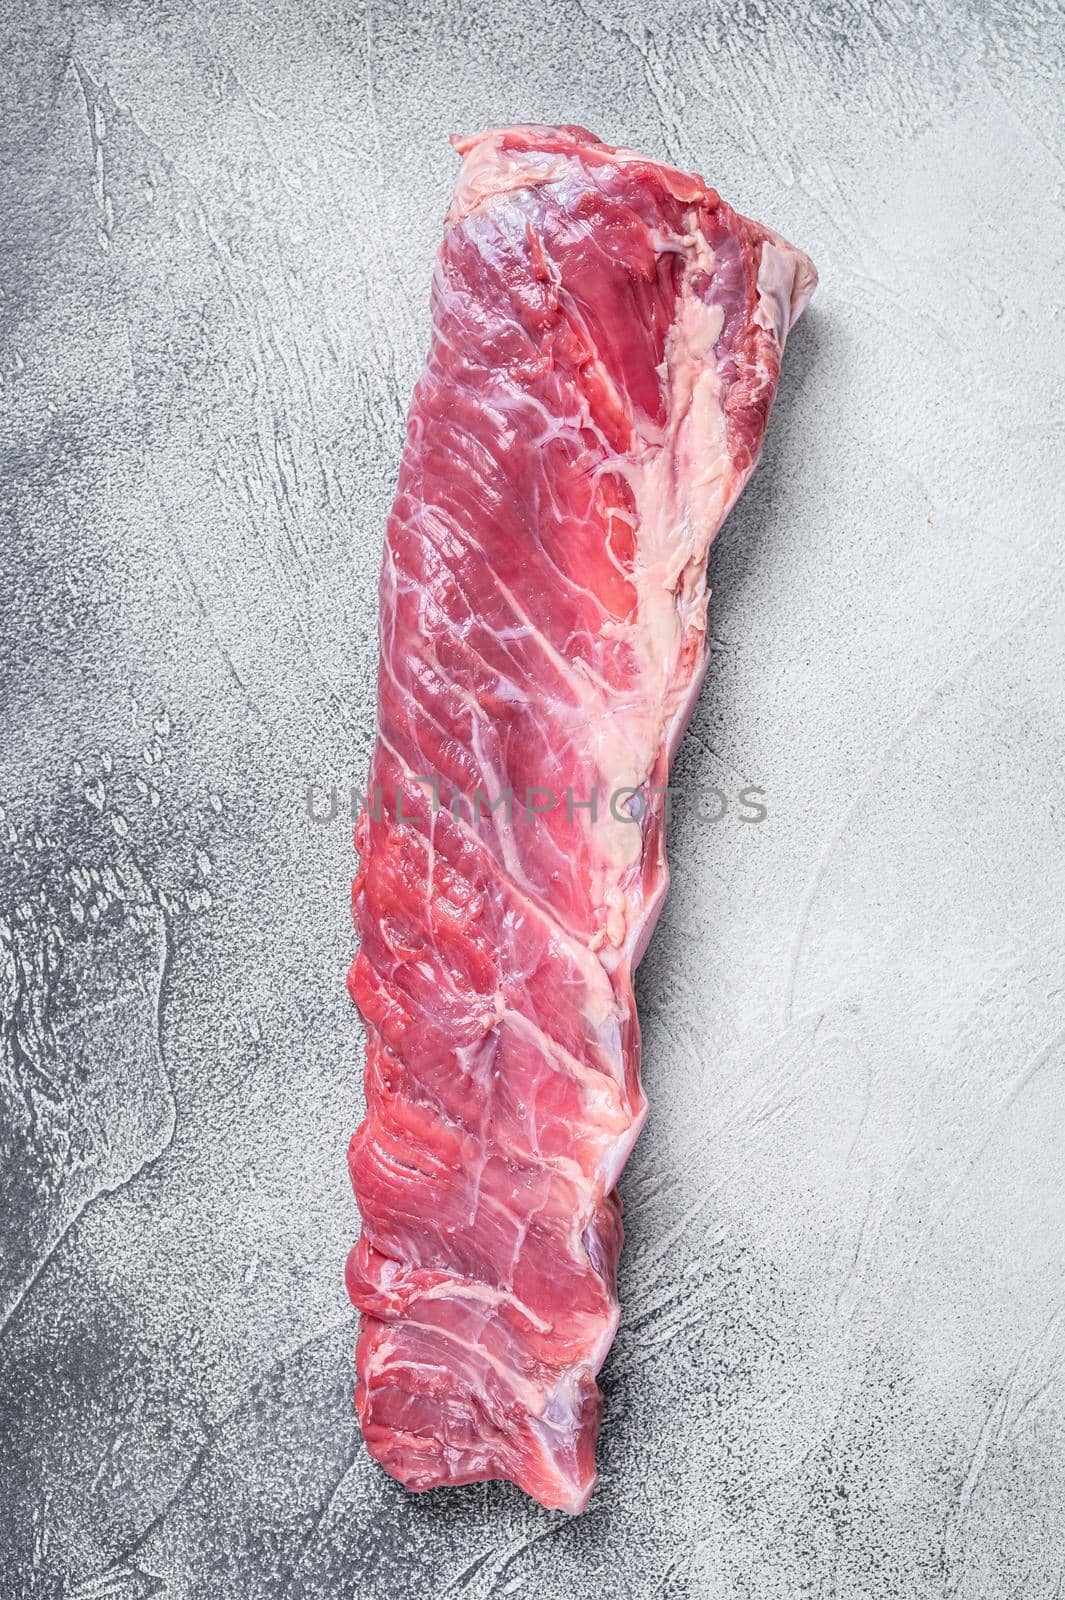 Raw veal calf short spare rib meat. White background. Top view.